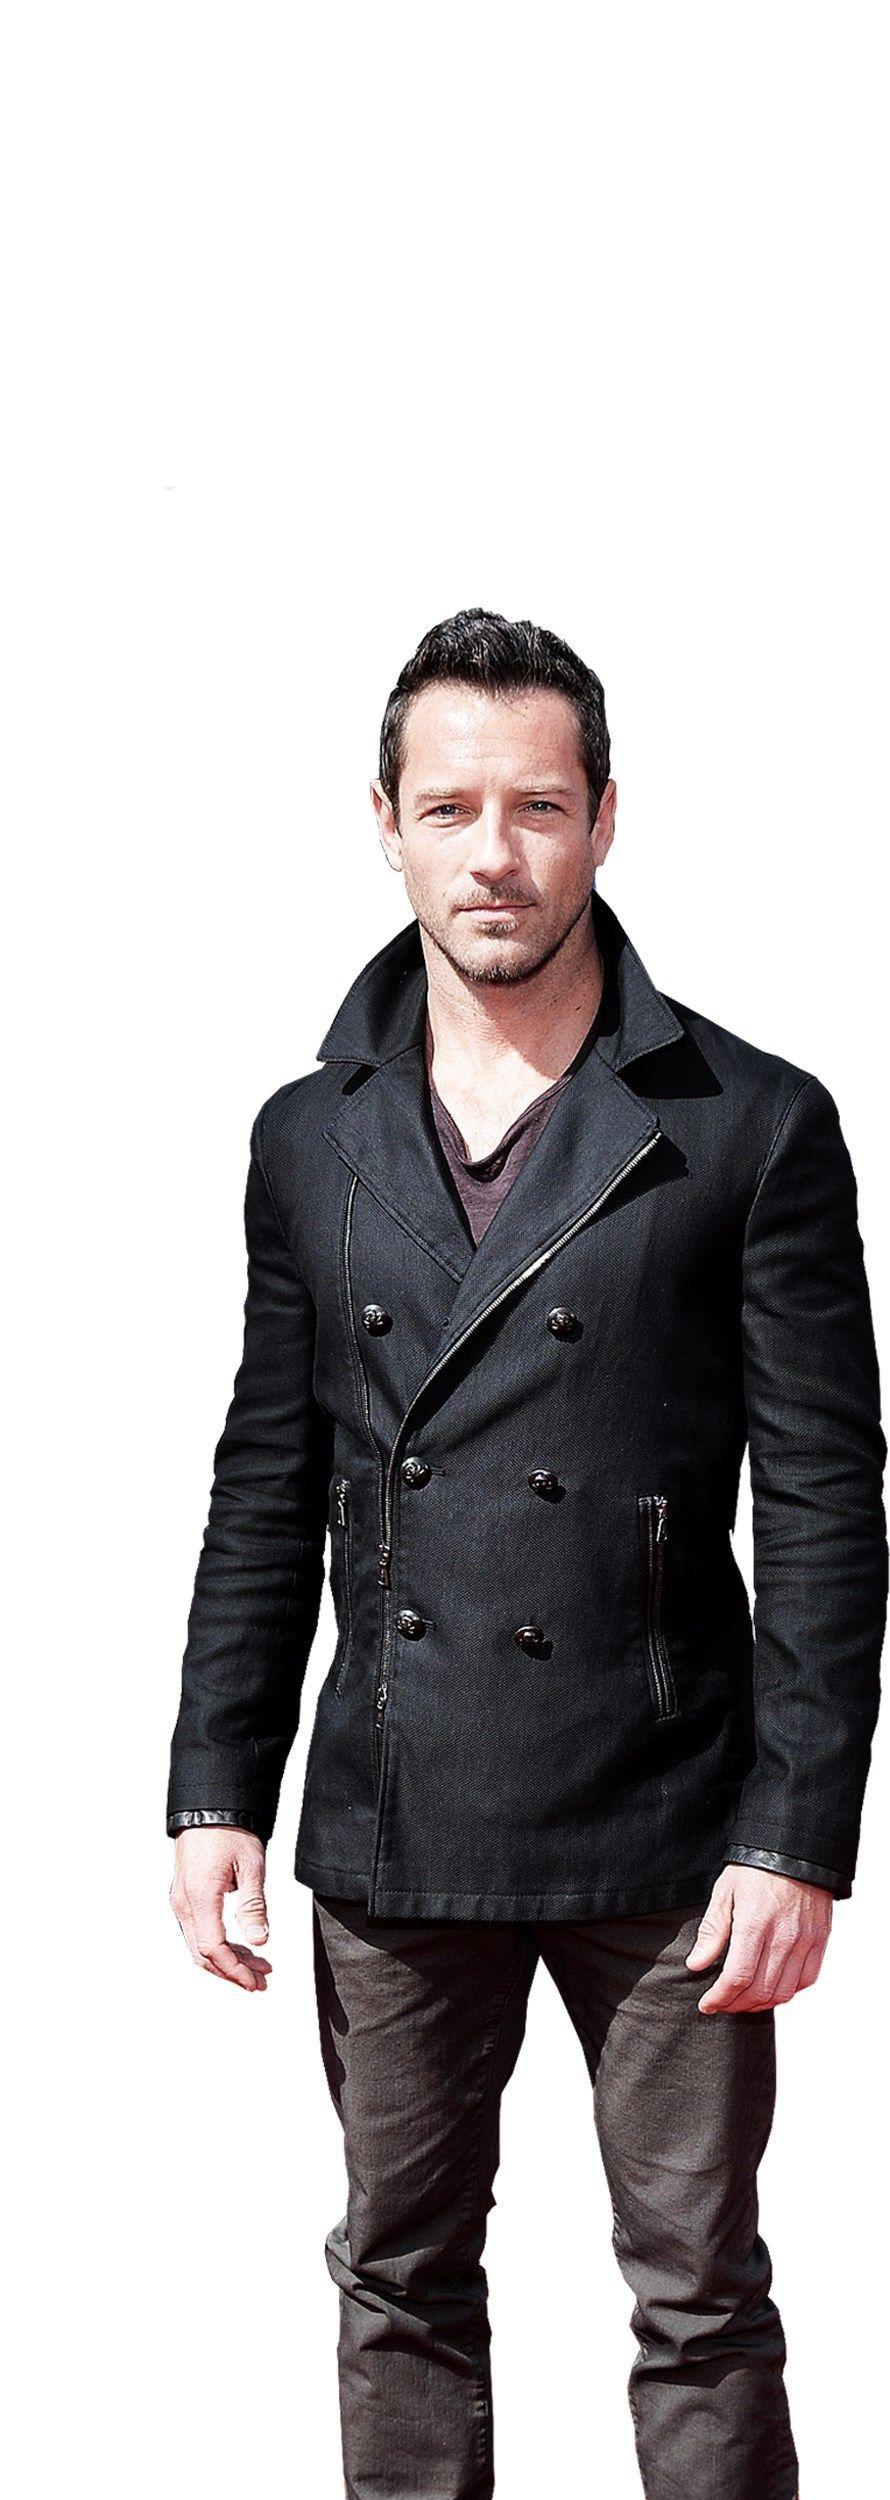 Ian Bohen. Known people people news and biographies